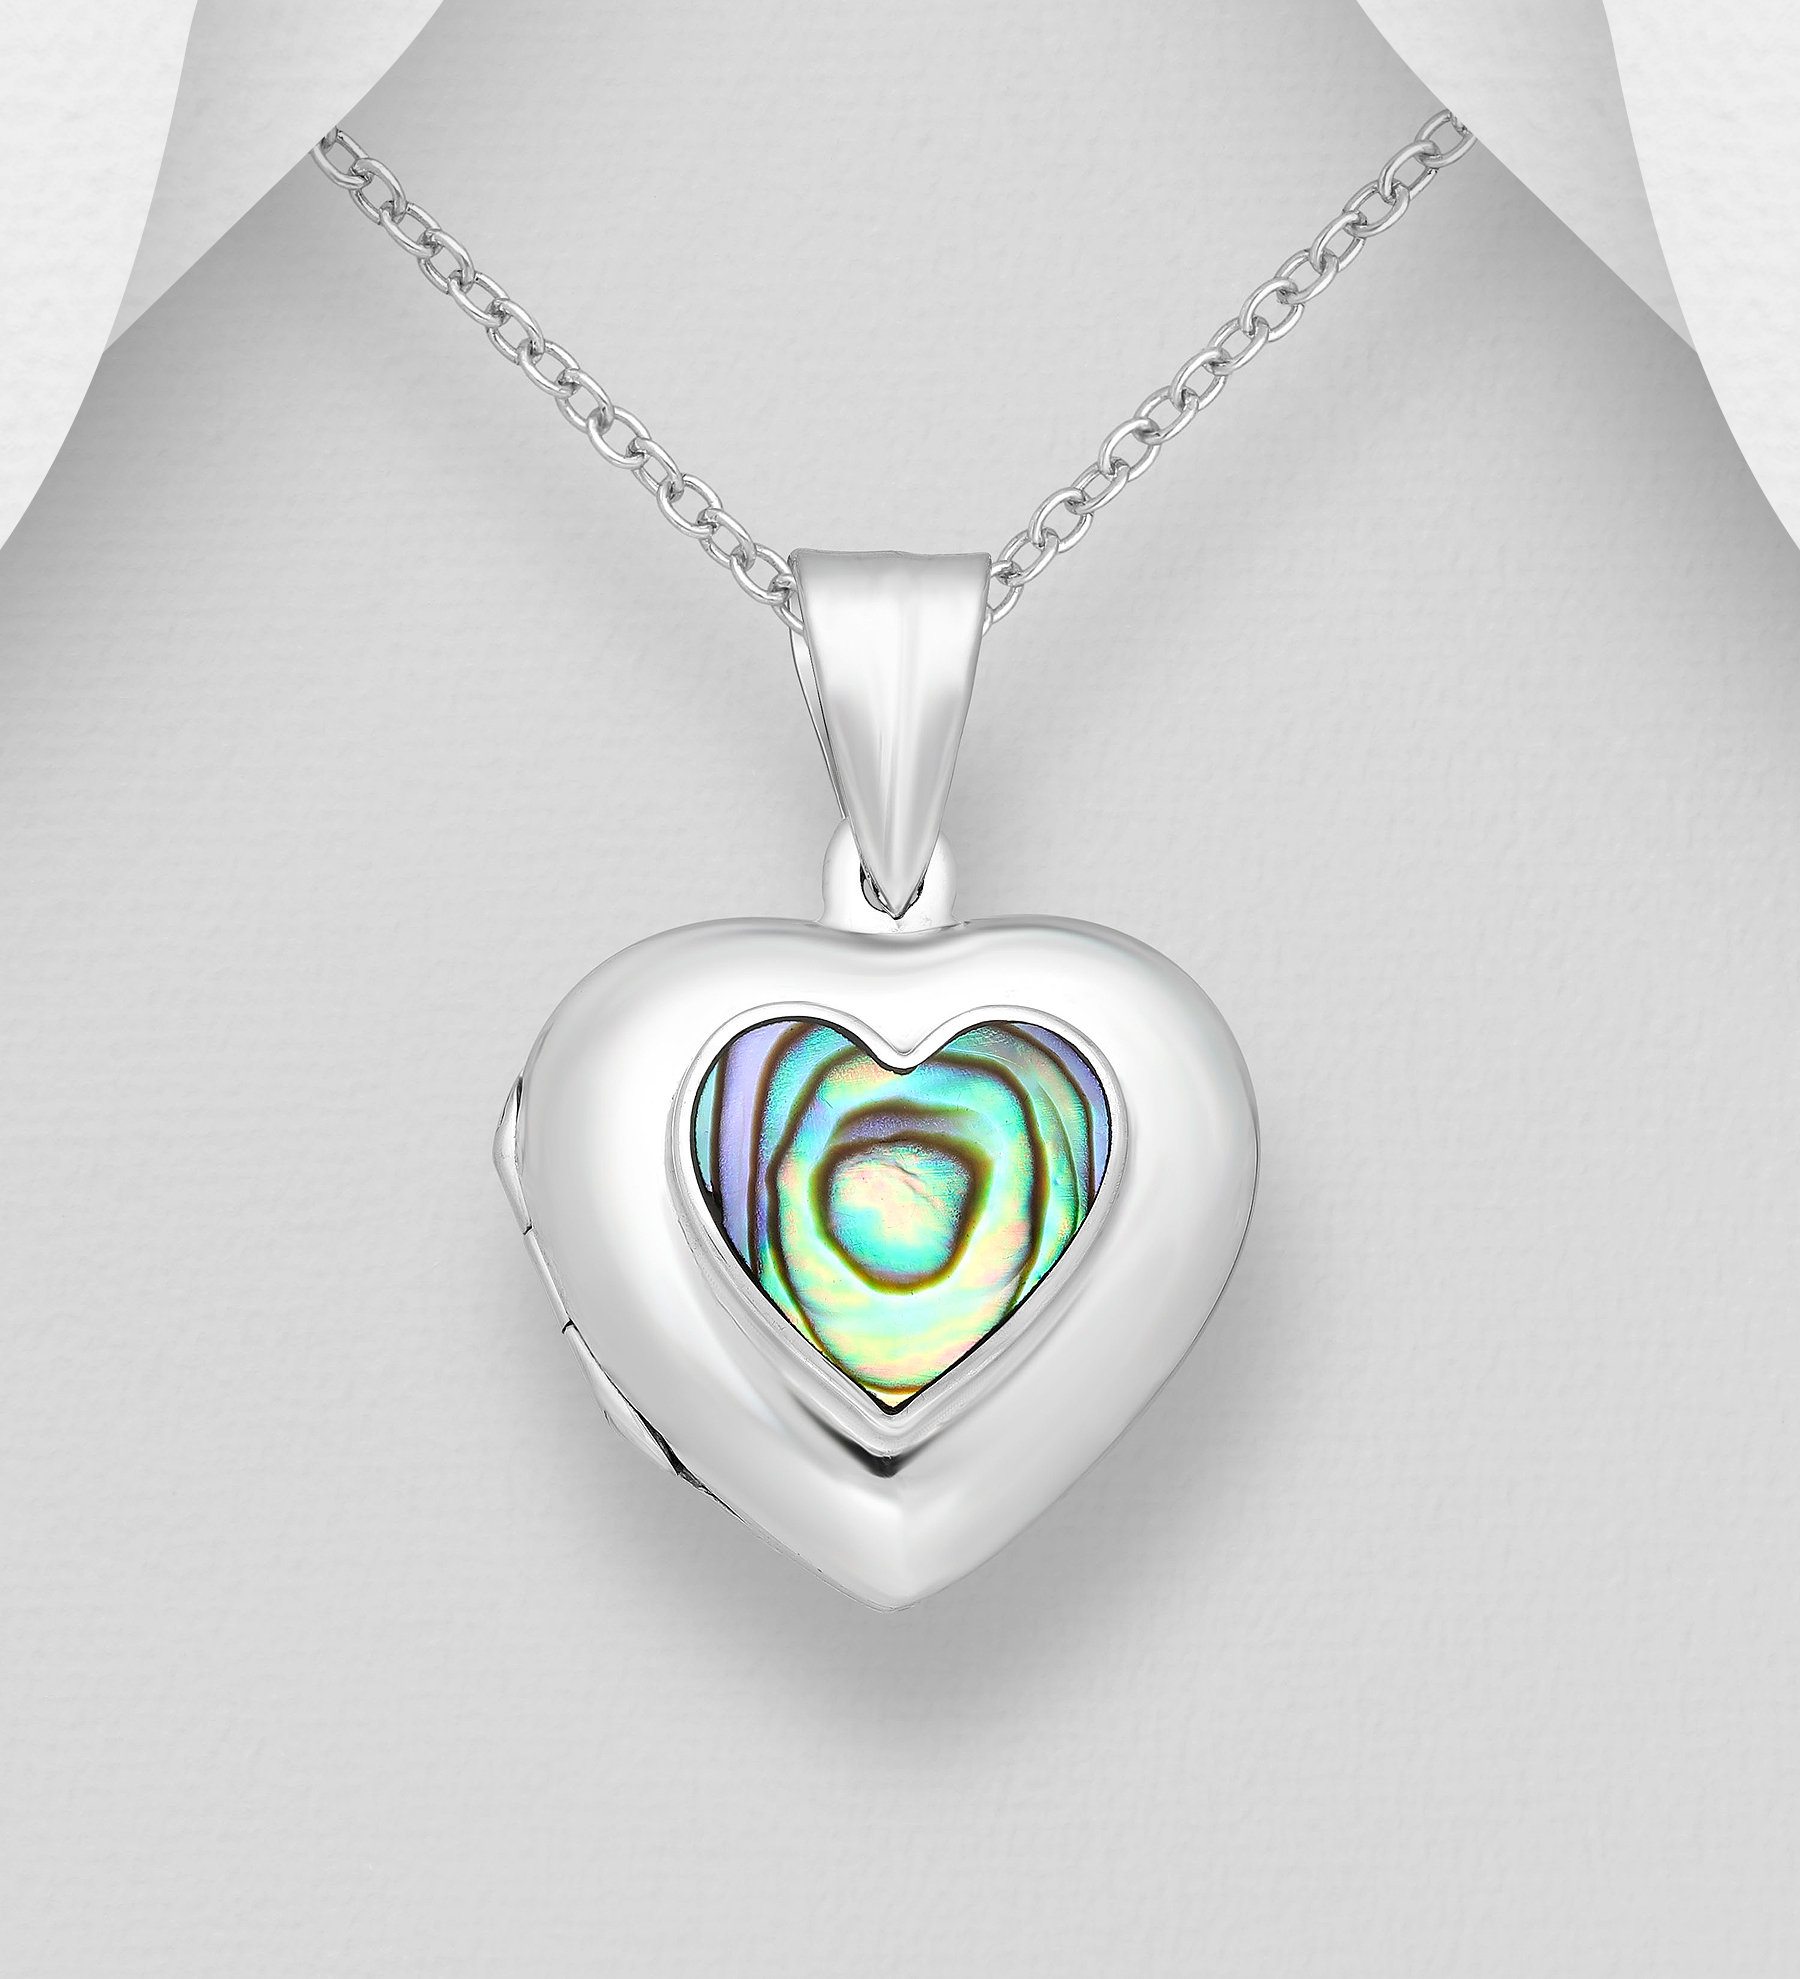 473-2861 - Wholesale 925 Sterling Silver Heart Locket Pendant Decorated With Shell